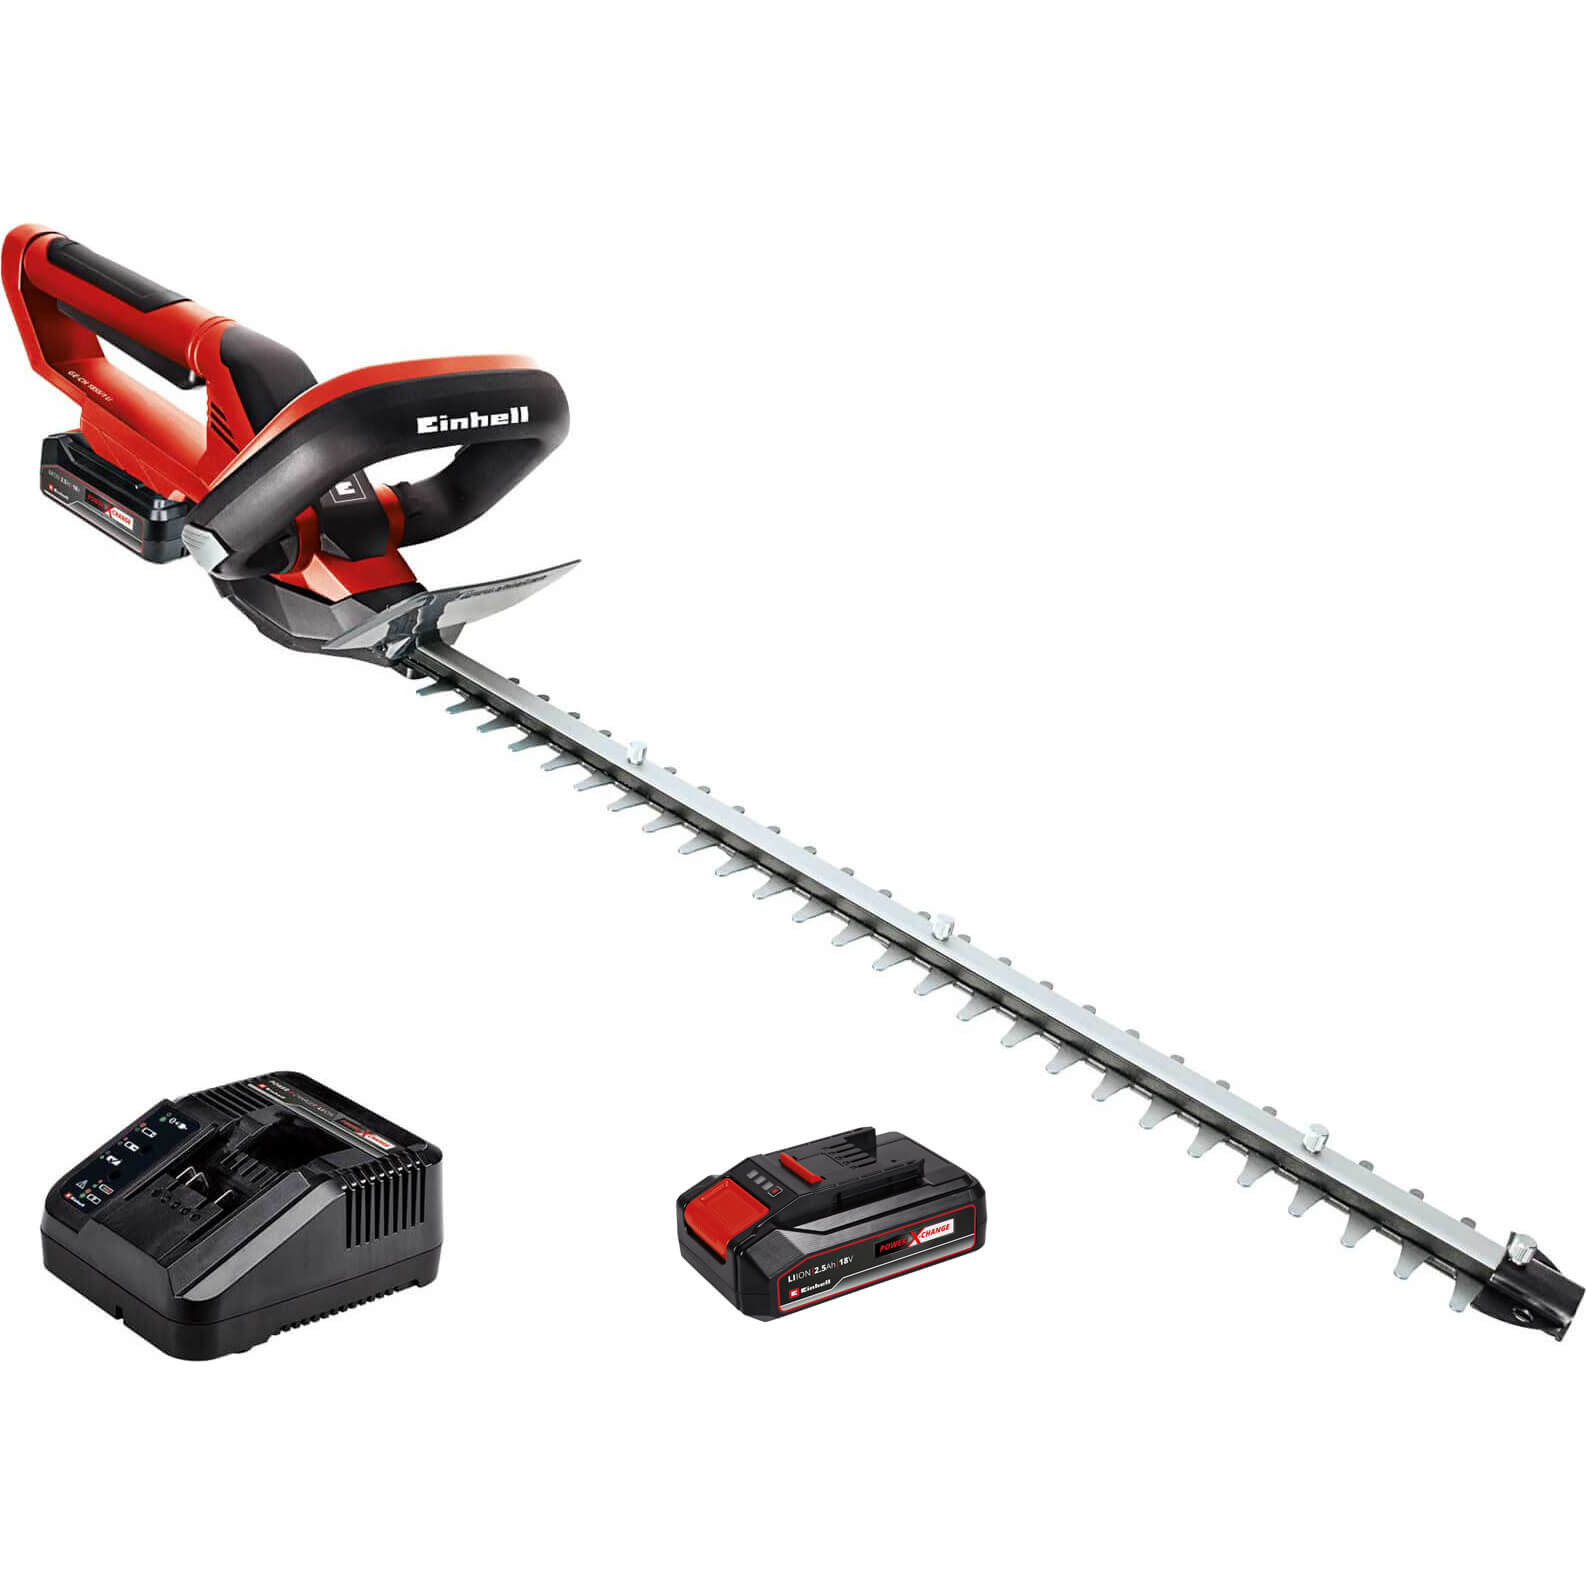 Image of Einhell GE-CH 1855/1 18v Cordless Hedge Trimmer 550mm 2 x 2.5ah Li-ion Charger